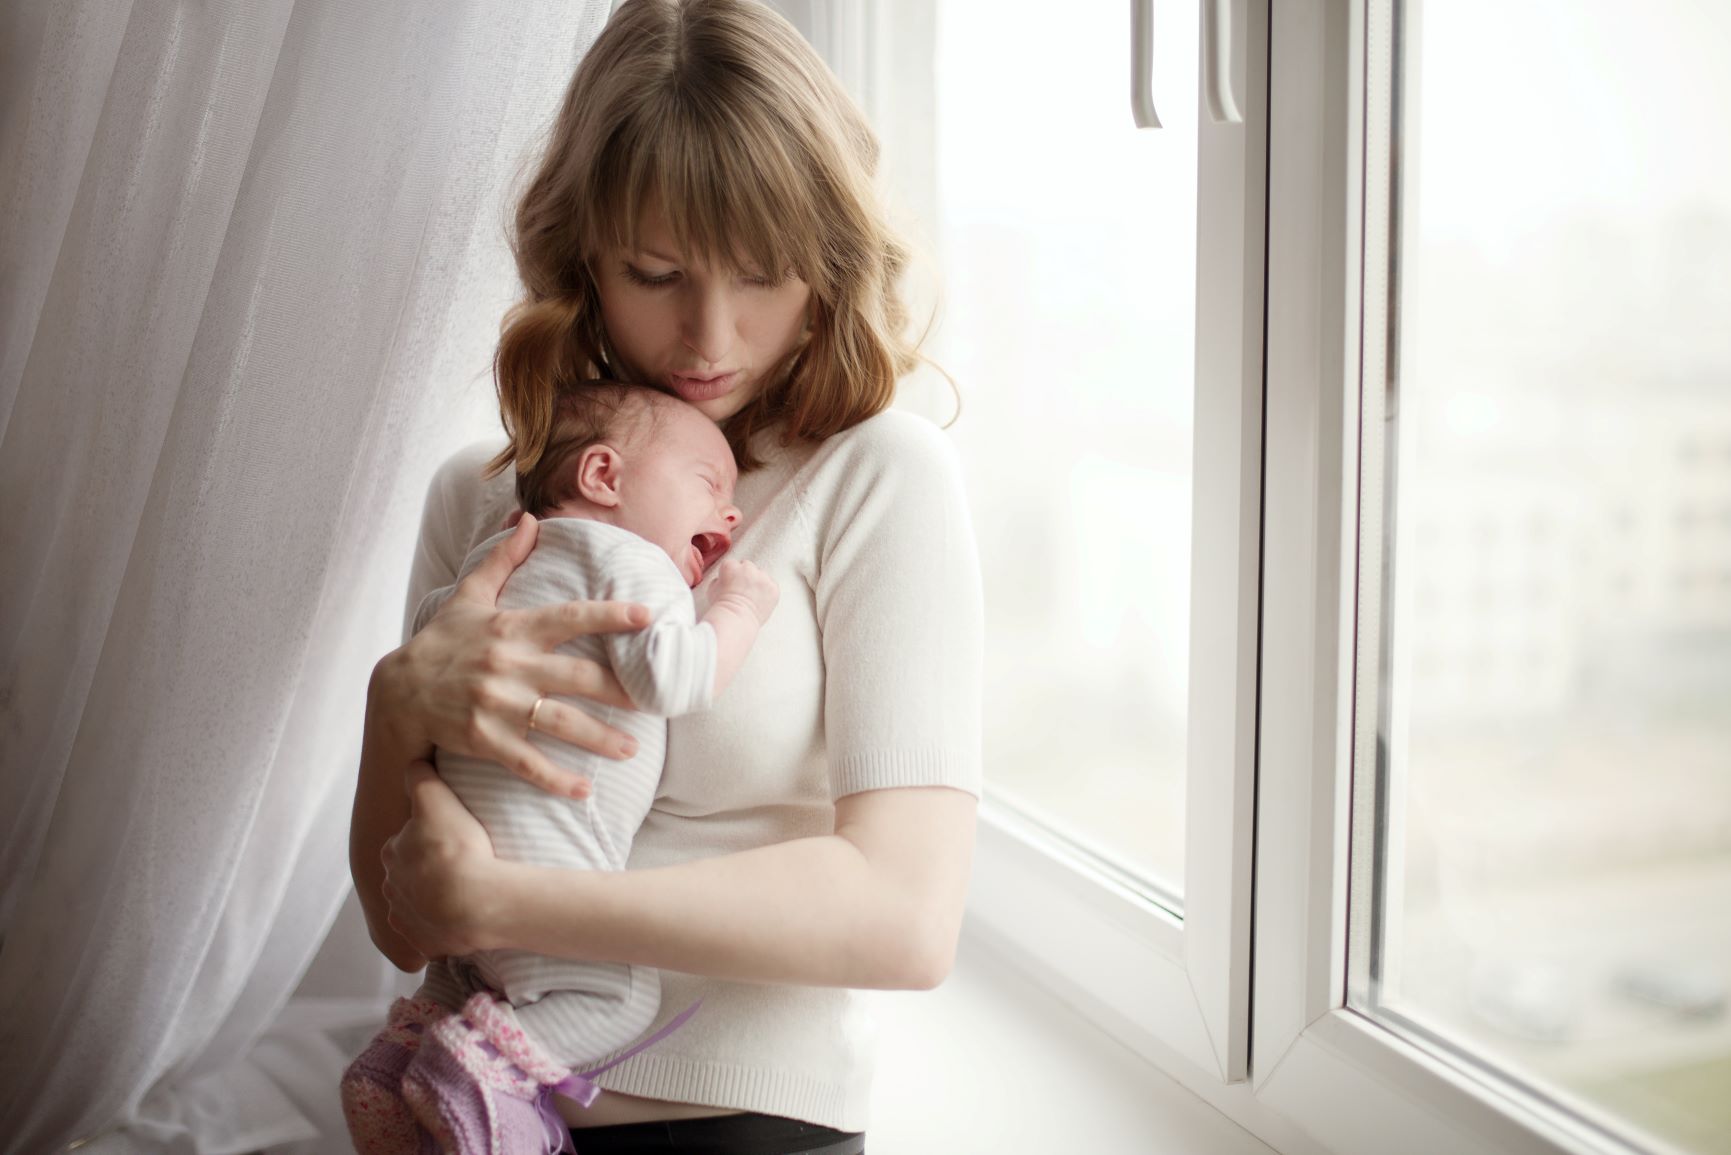 A mother holding her crying baby in front of the window